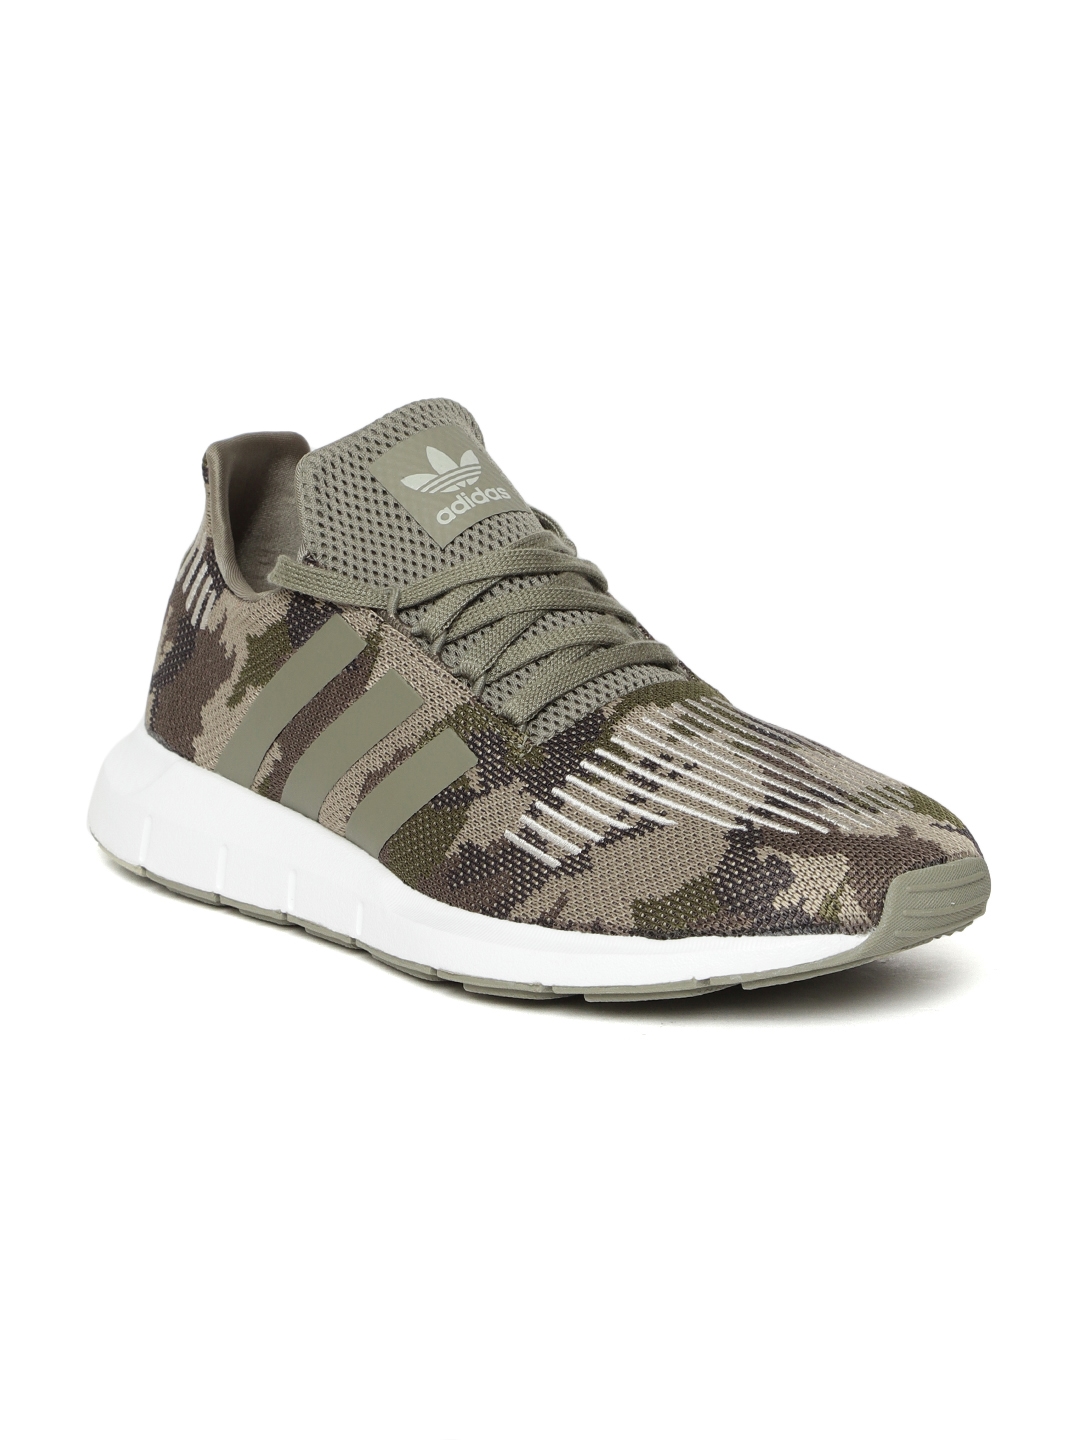 adidas men's camouflage sneakers